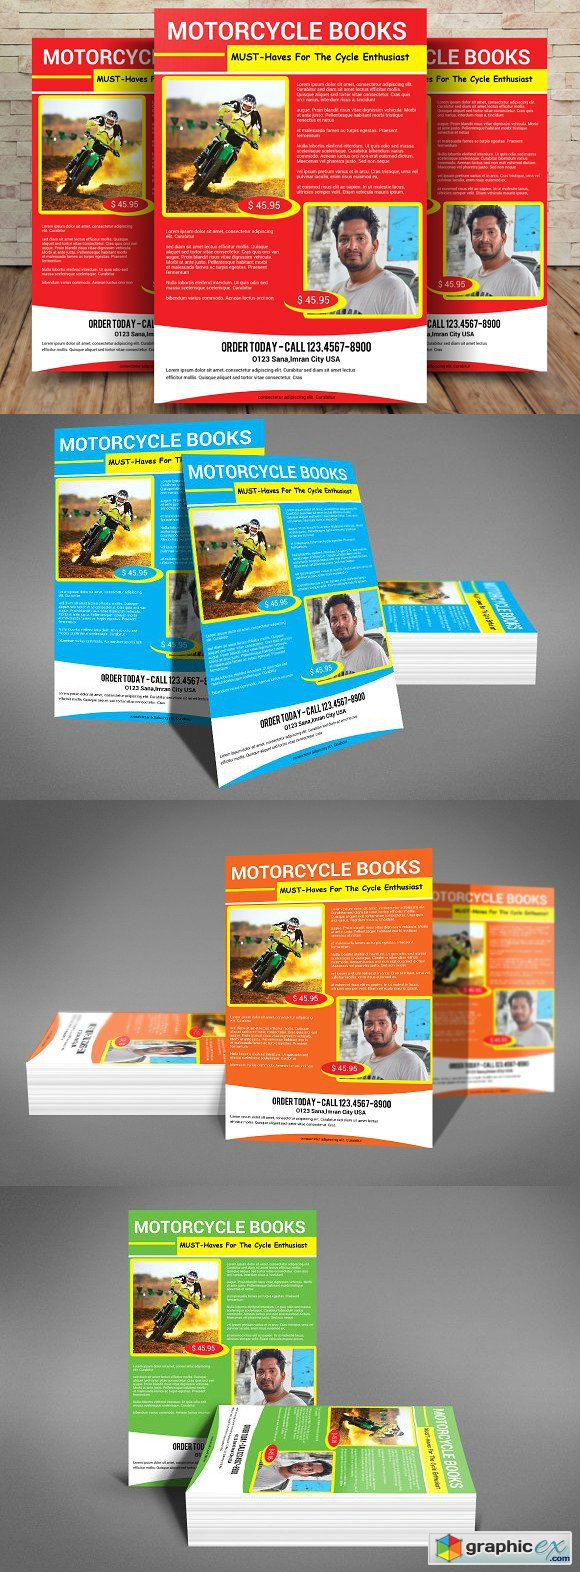 MOTORCYCLE BOOKS FLYER